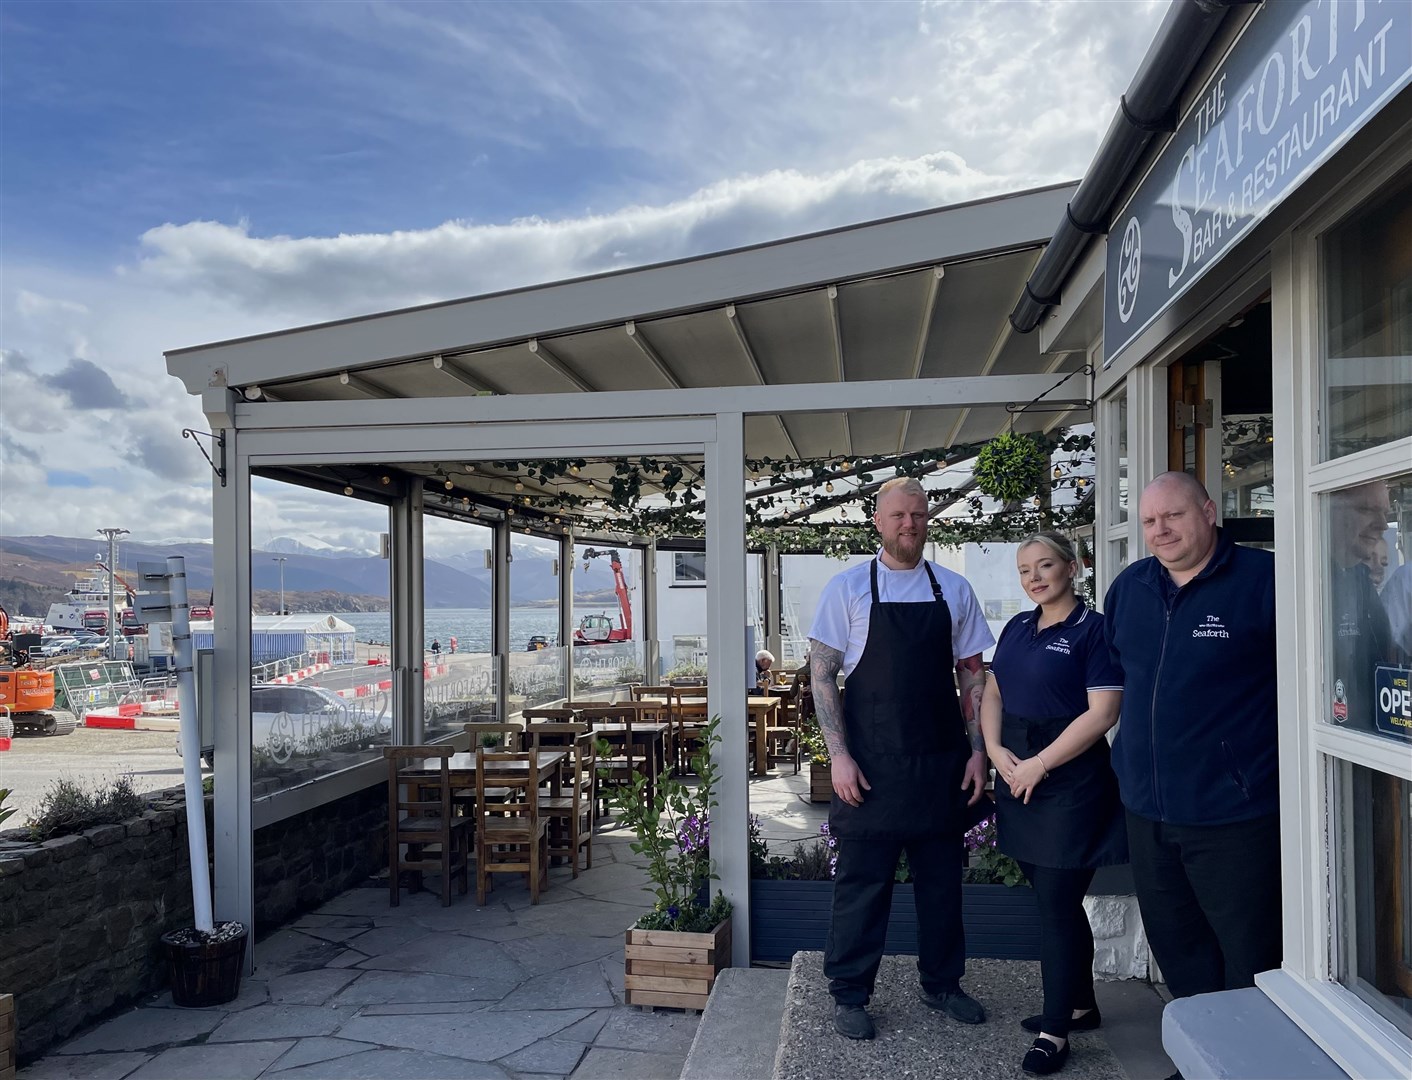 Seaforth chef Venca Jaros (left), duty manager Demi Yorke (centre) and general manager Jody Keating have all welcomed the low- rent permanent accommodation for staff in Ullapool. Heartland Media and PR